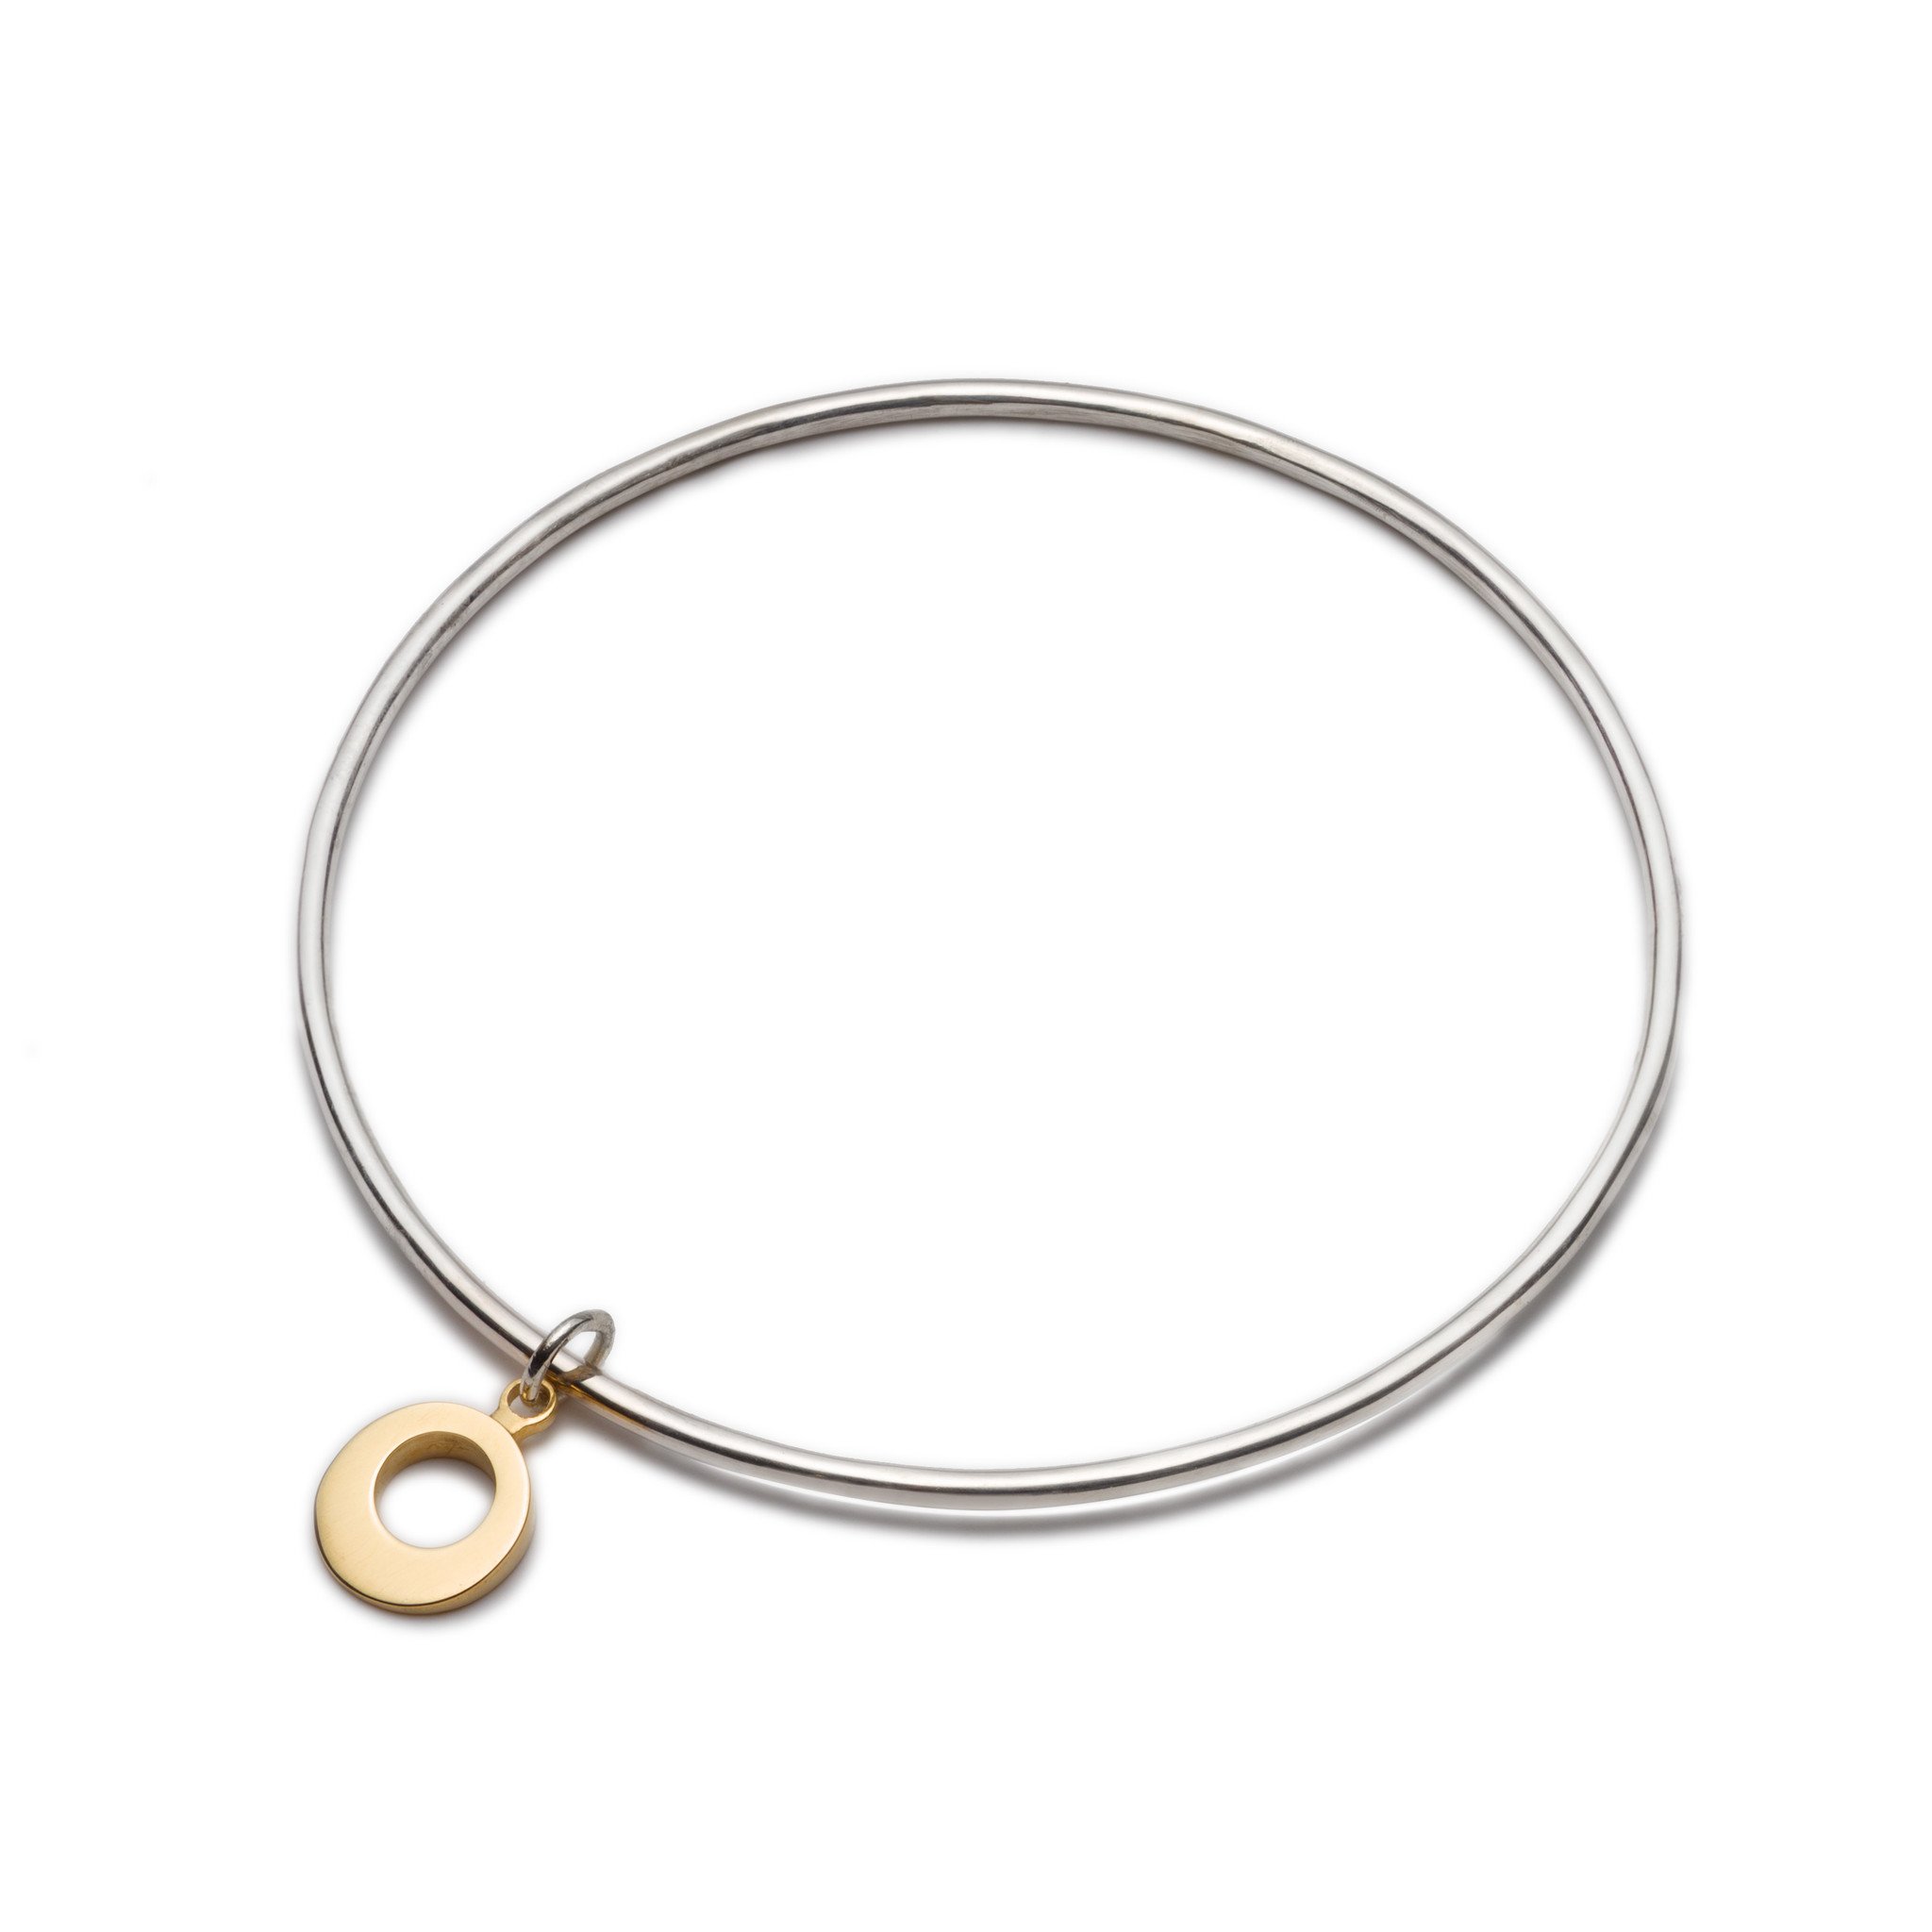 Silver Bangle with Gold Charm. Unique designer jewellery handcrafted in Ireland.